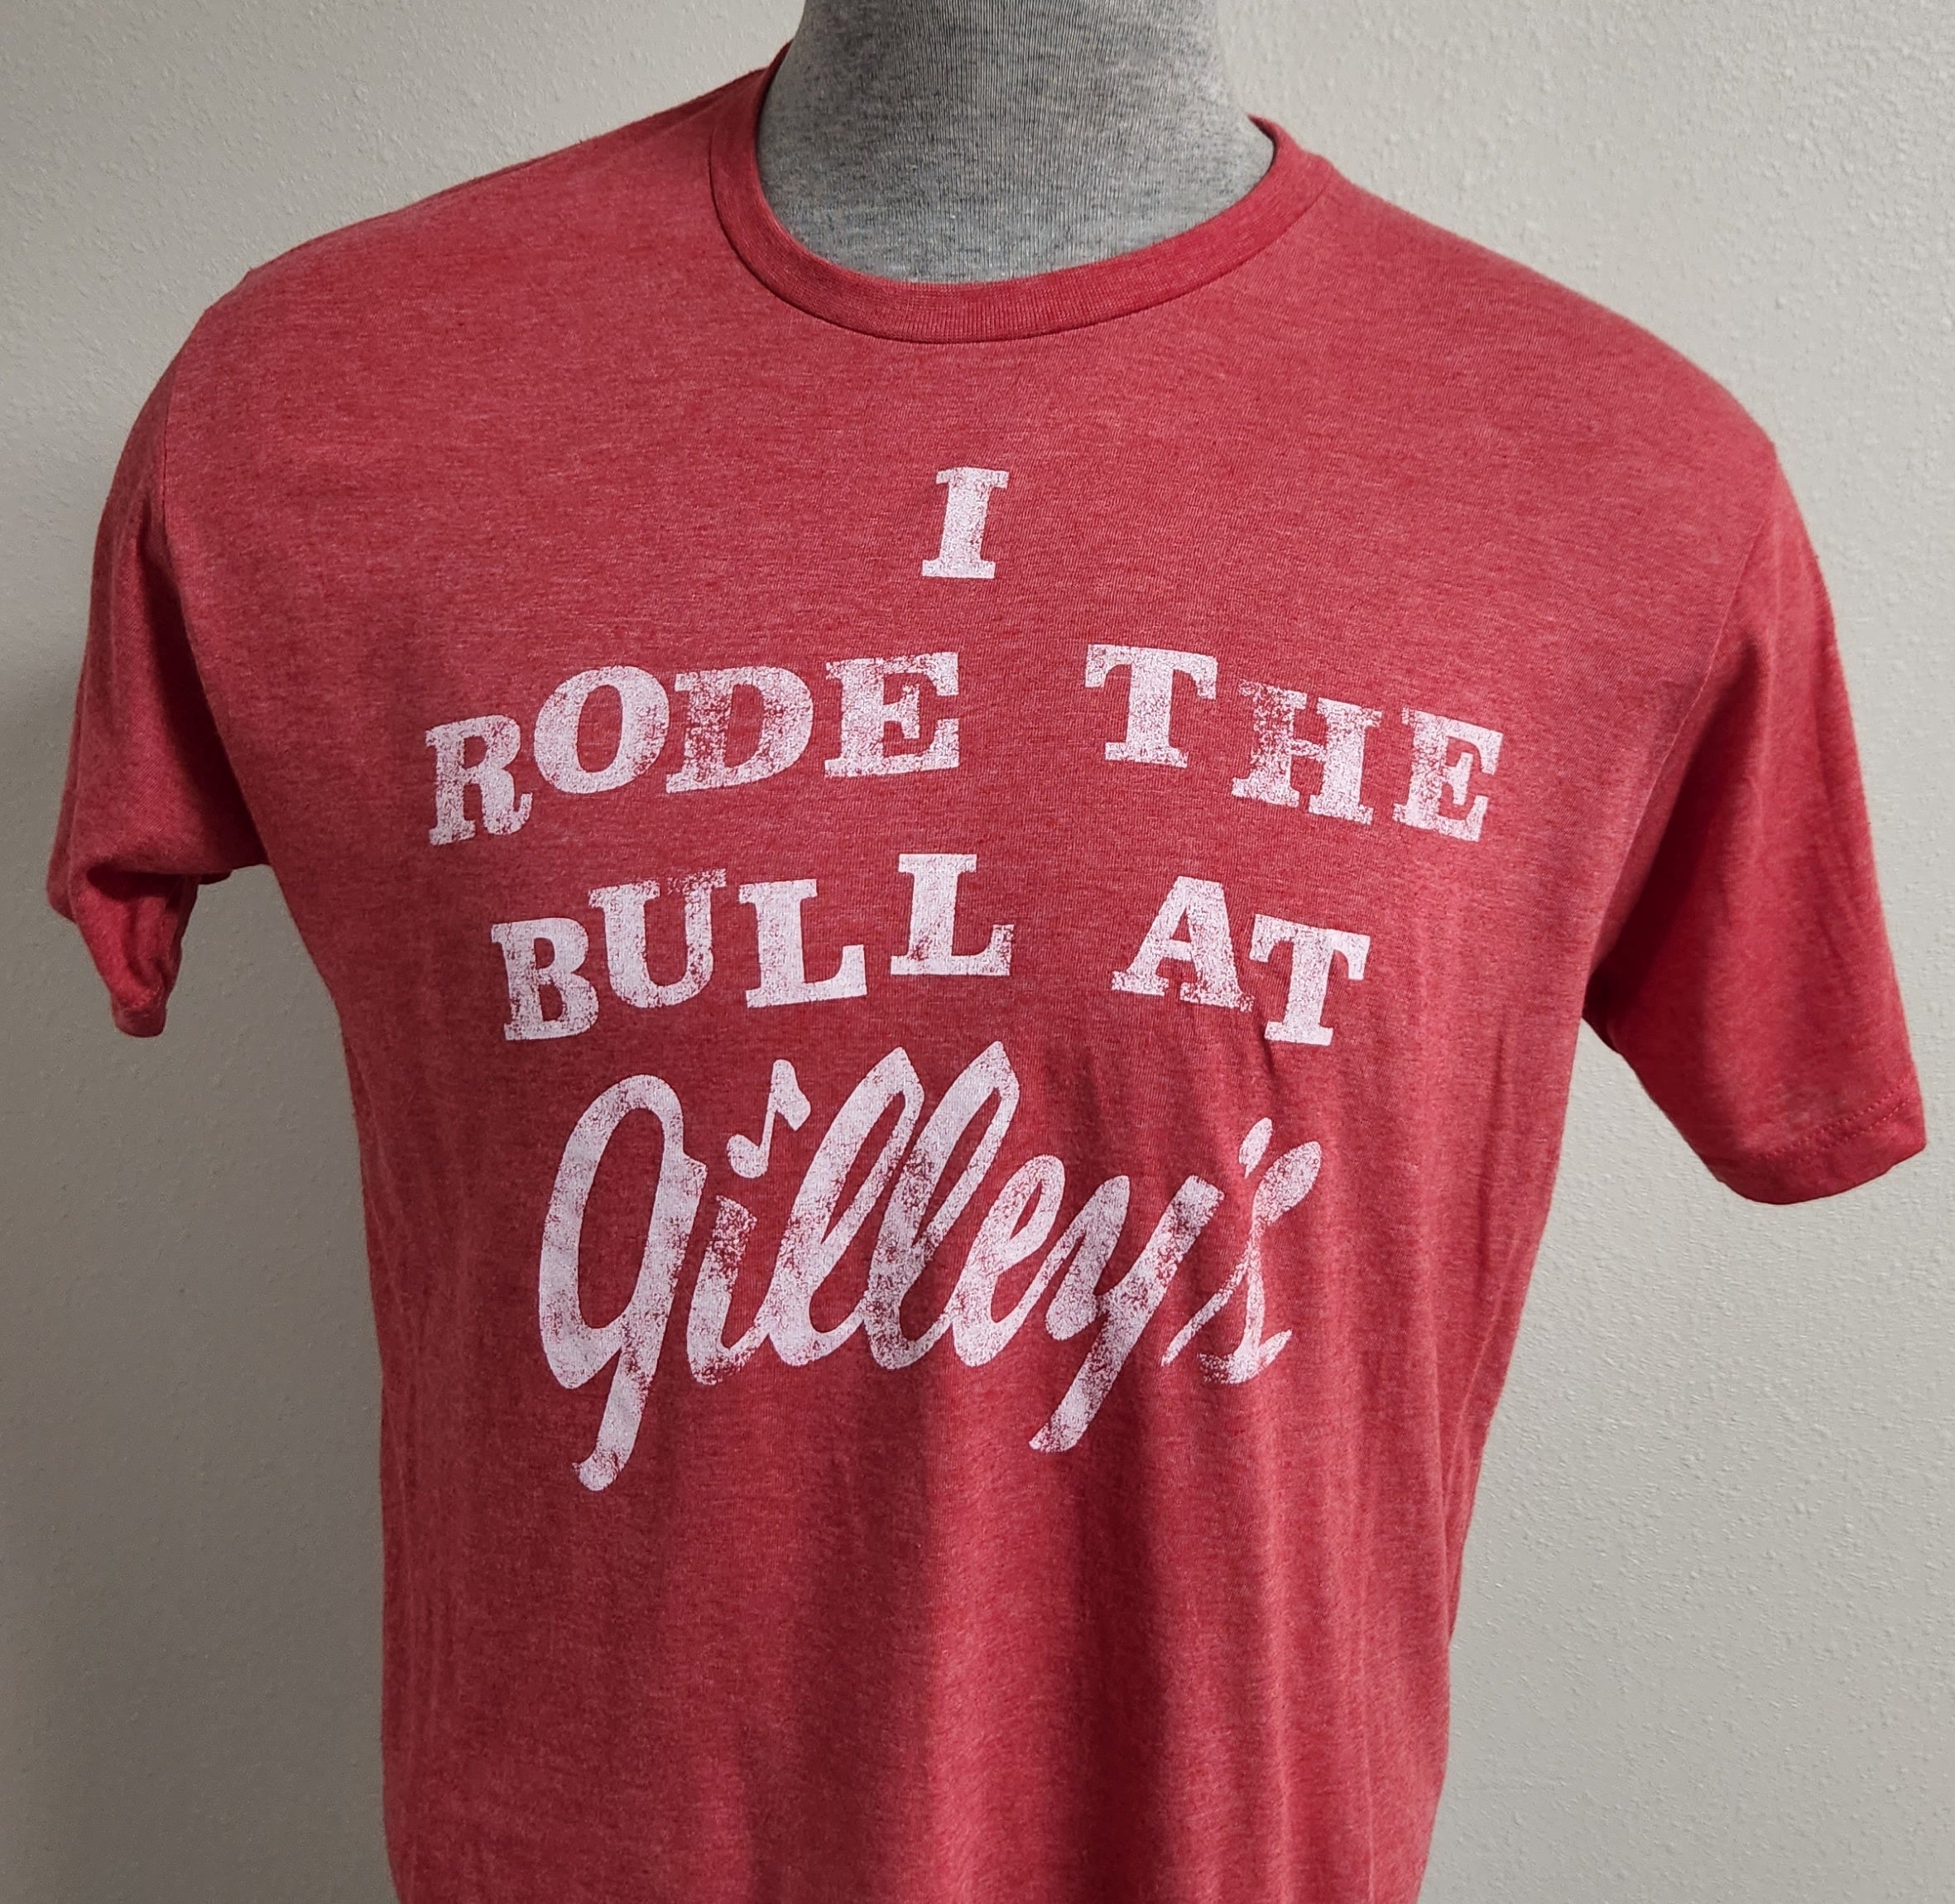 Rode The Bull At Gilley's Shirt